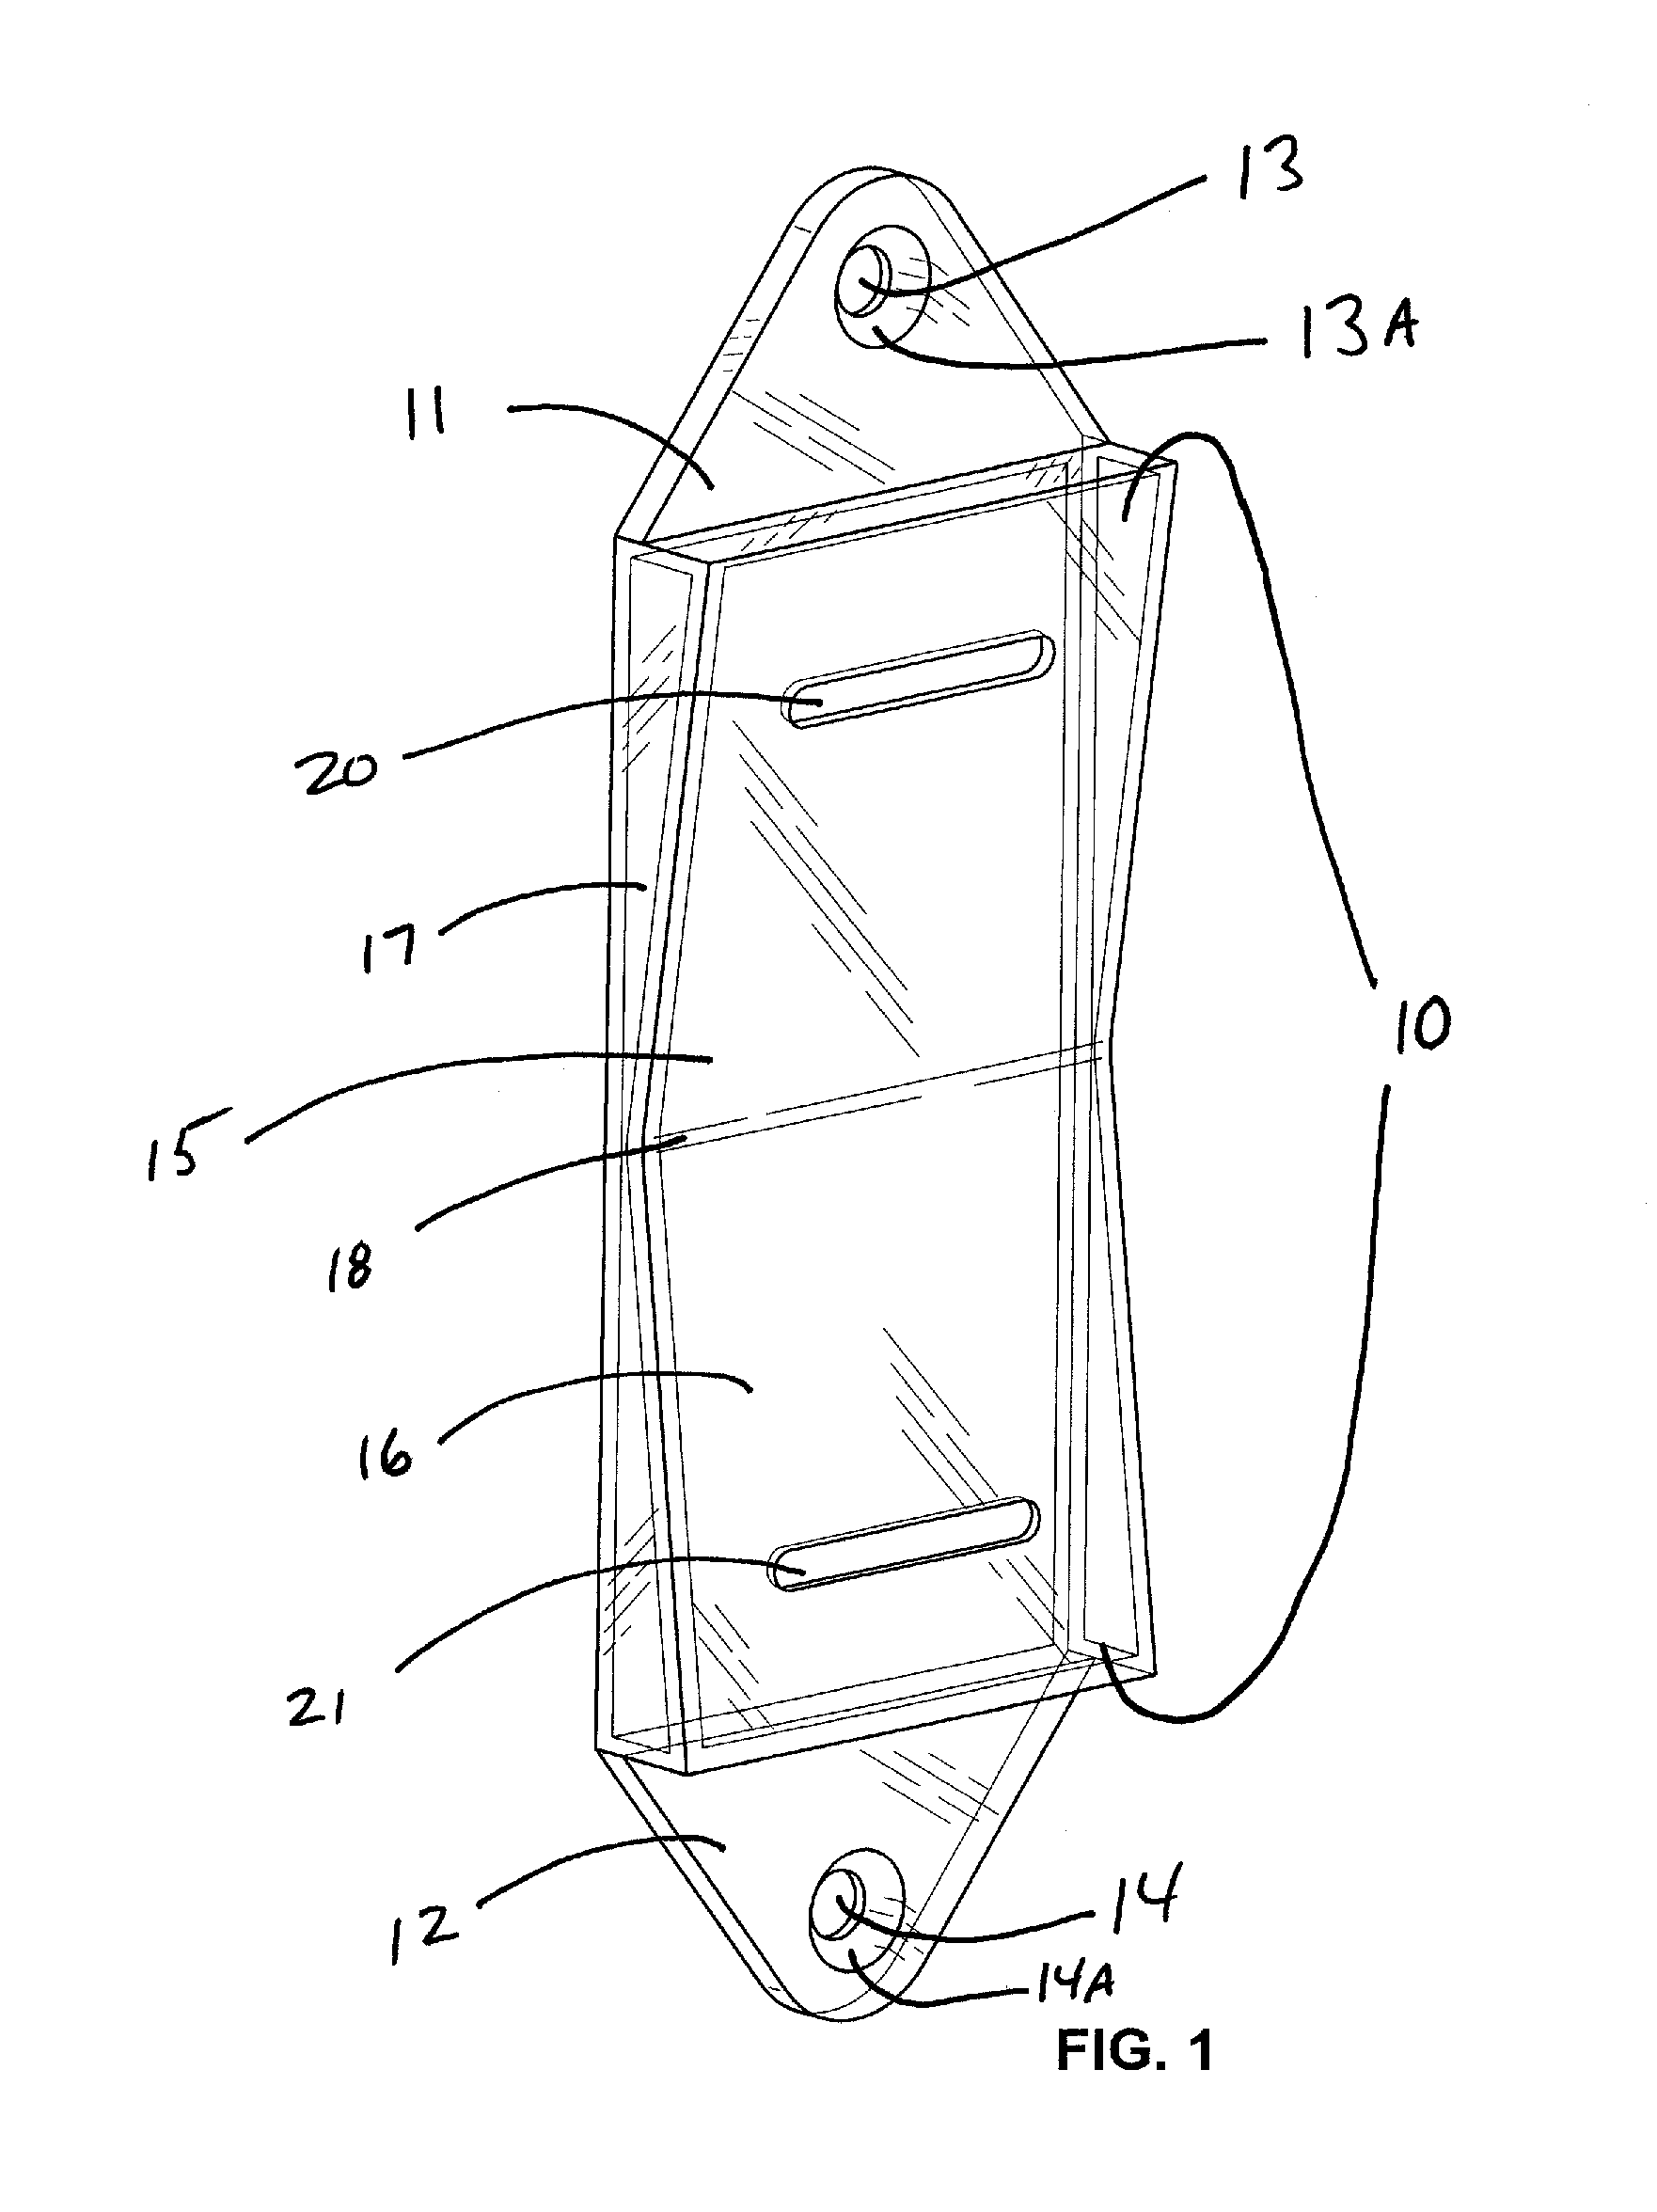 Switch guard for restricting the operation of a rocker type electric wall switch